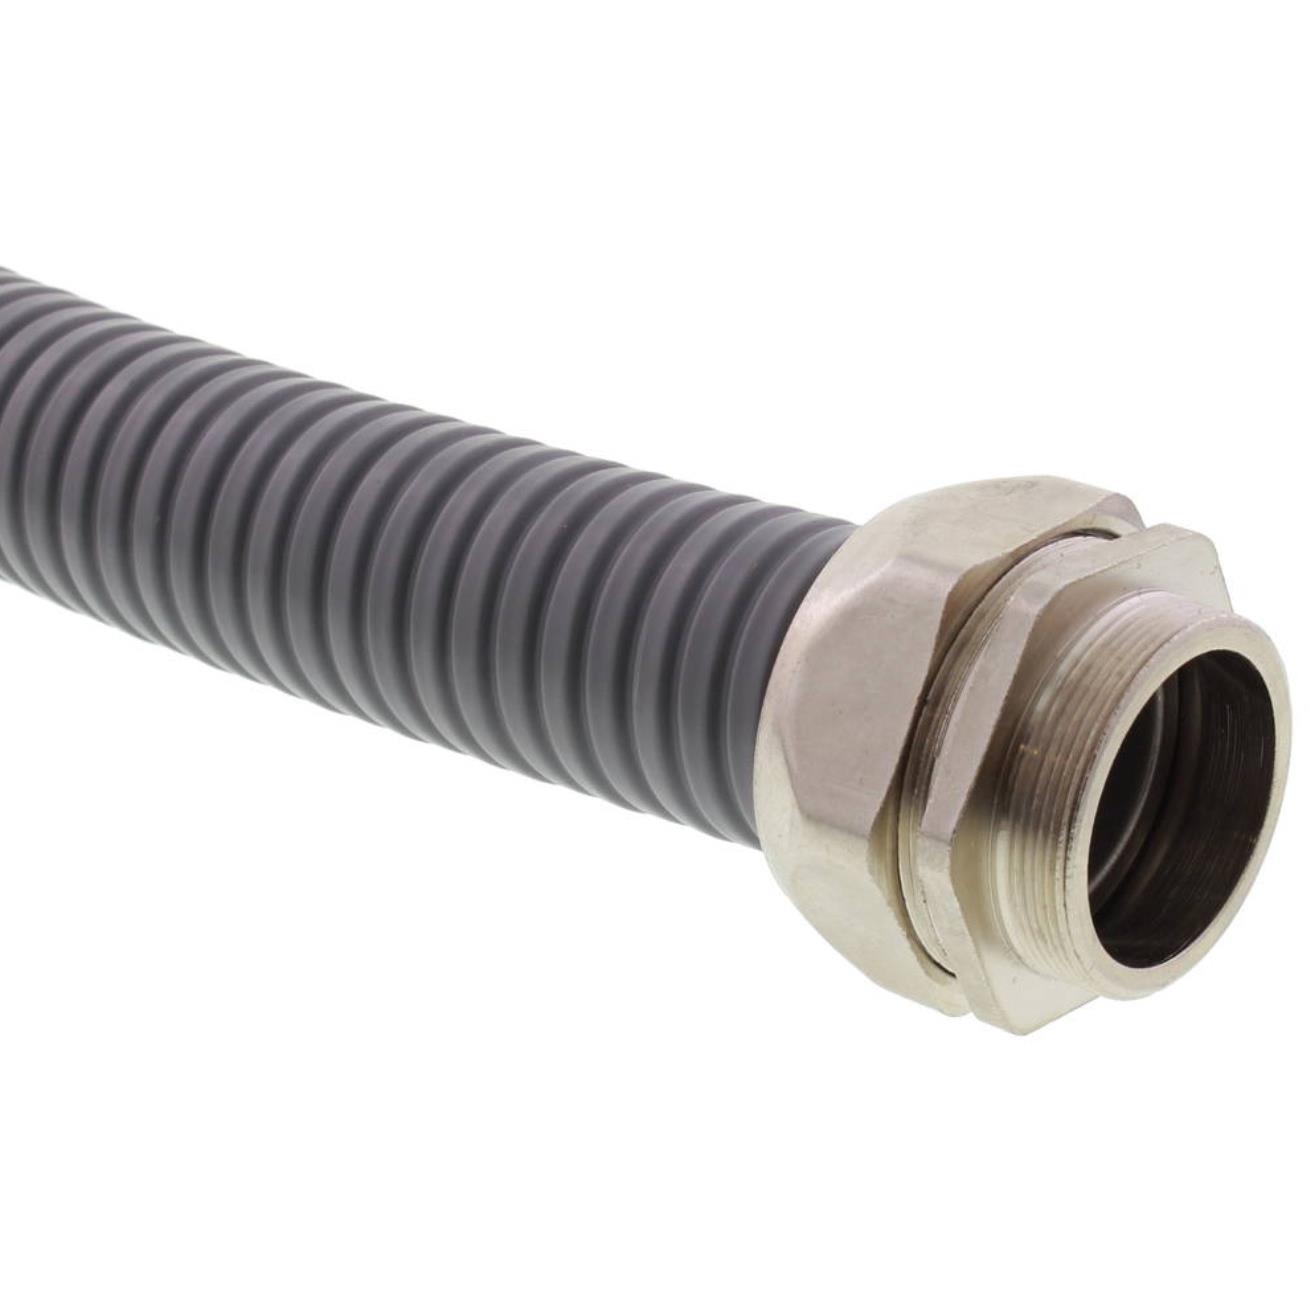 【BMCG-PU-C-50-LG】T-CONNECTOR FOR CORRUGATED PIPES